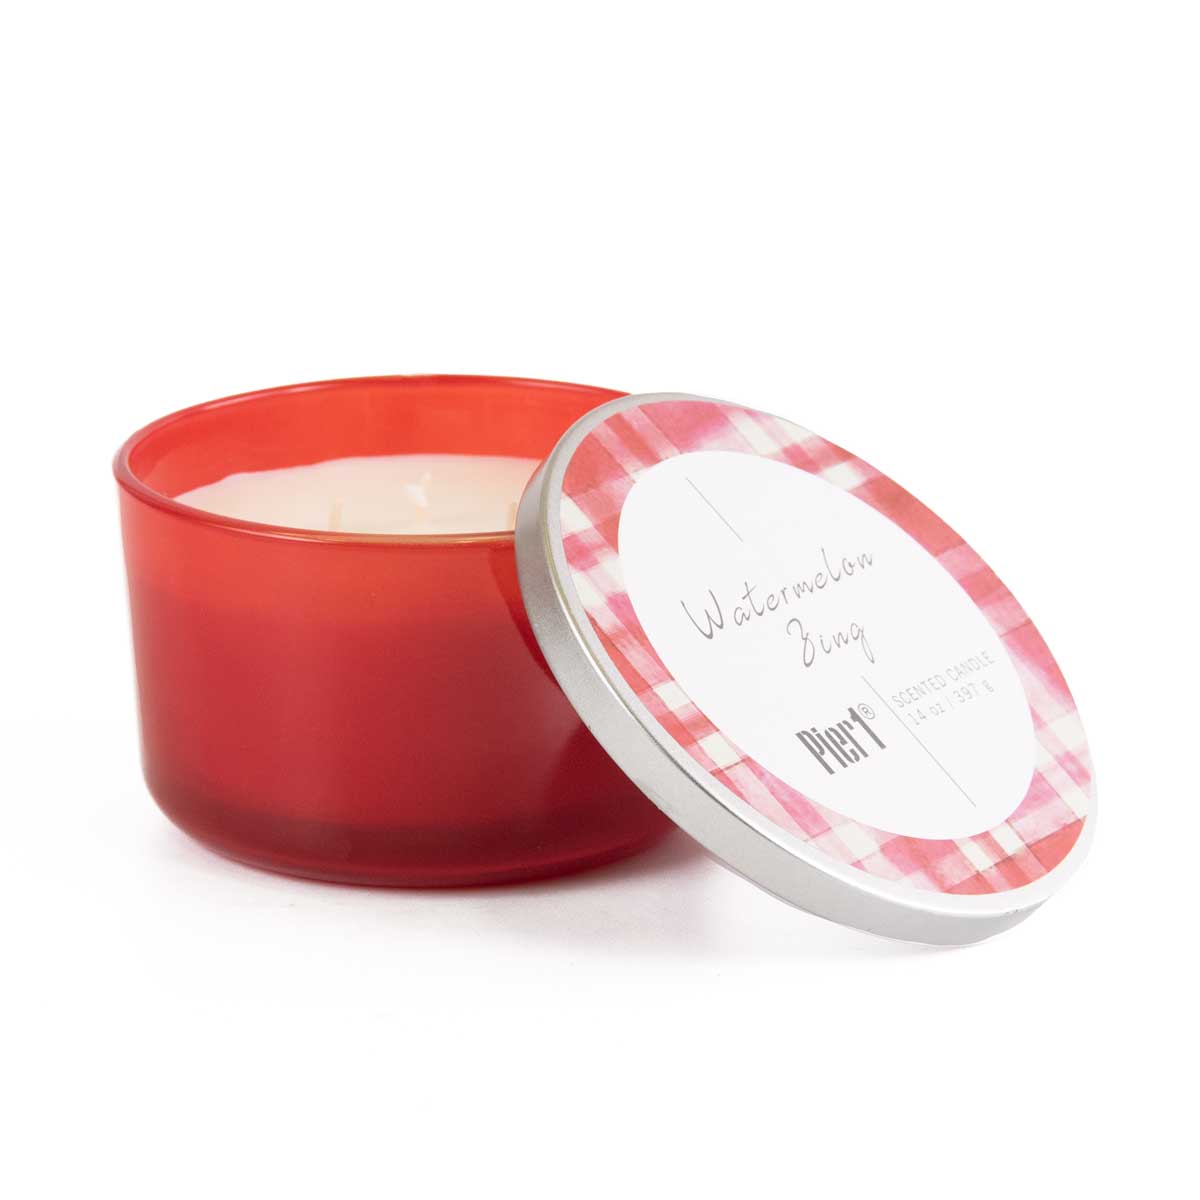 Pier-1-Watermelon-Zing-Filled-3-Wick-14oz-Candle-Candles